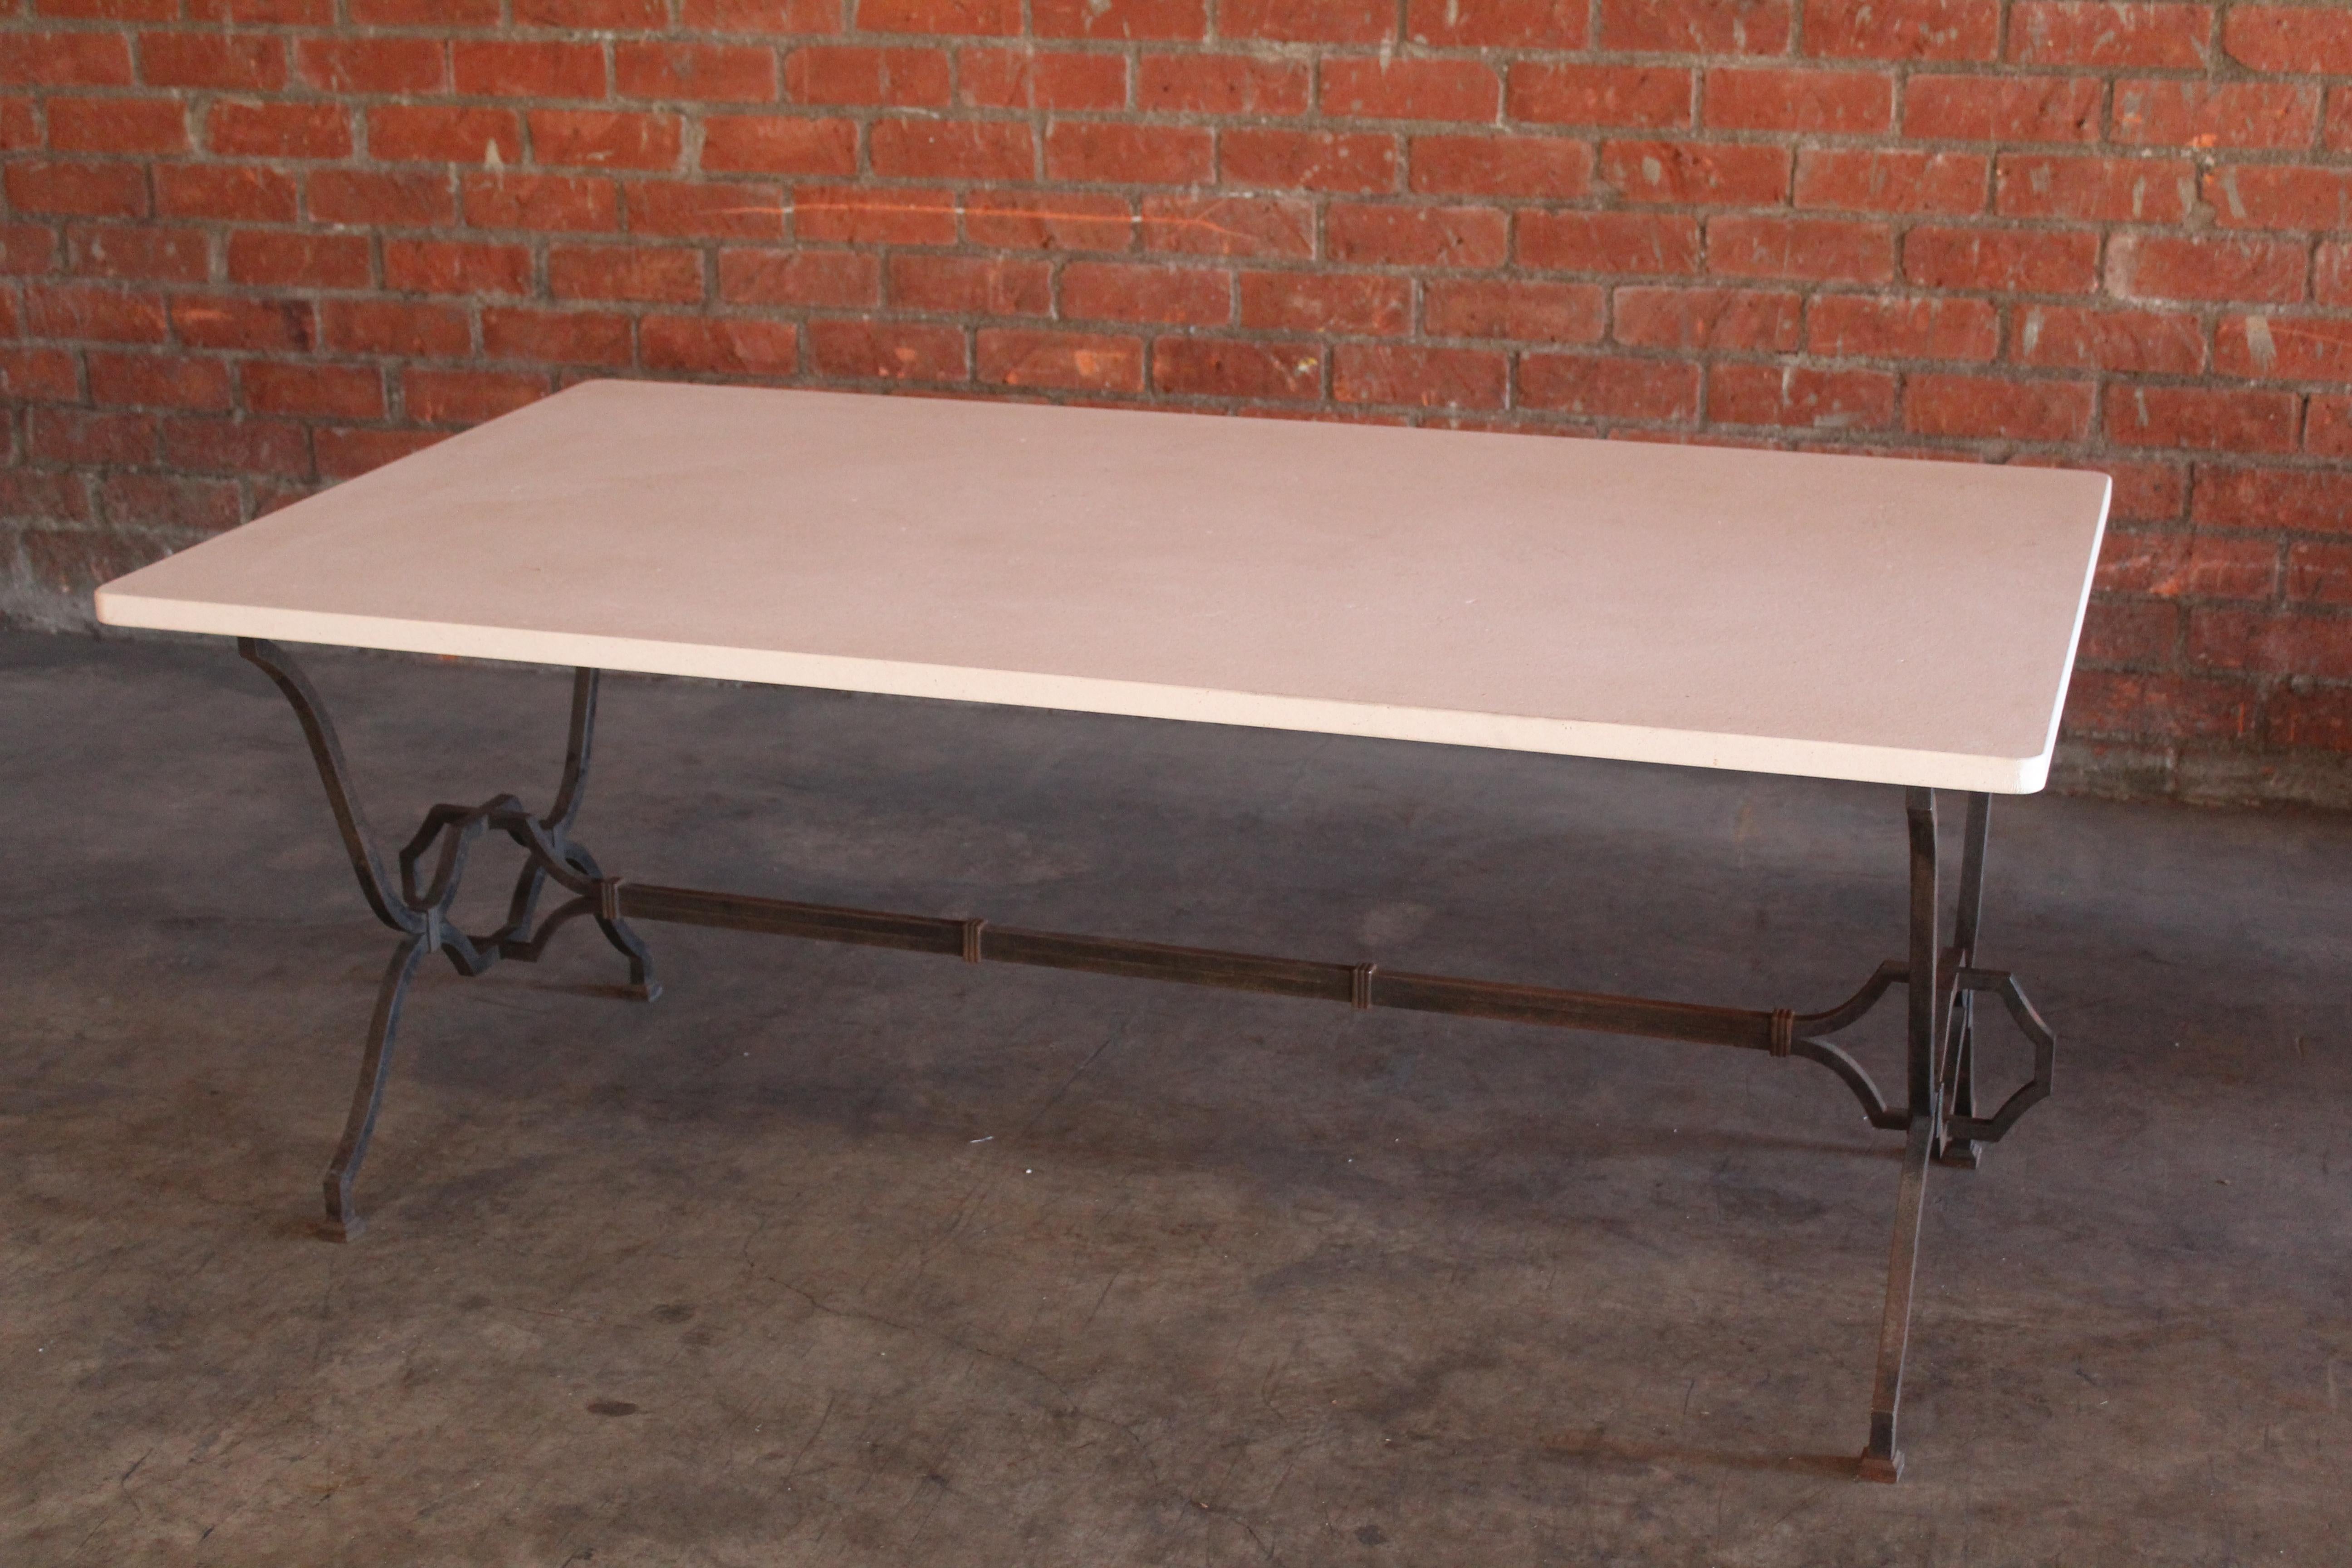 1940s French Wrought Iron and Limestone Table by Colette Gueden for René Prou For Sale 6